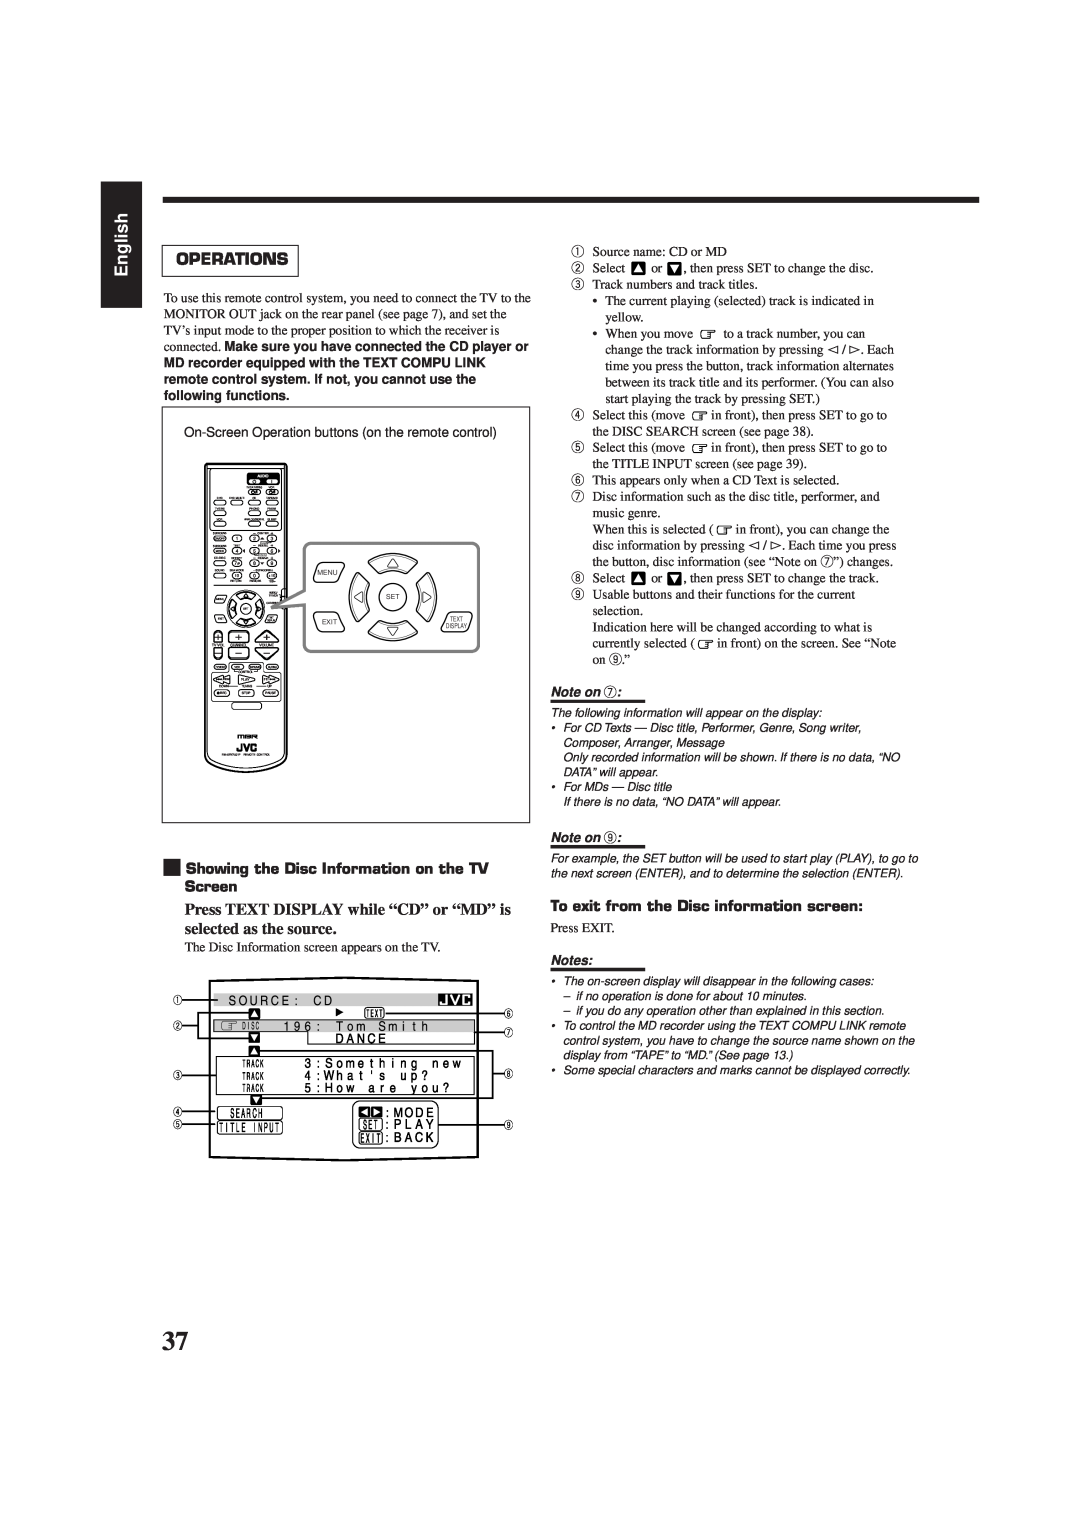 JVC RX-7001PGD manual English, Operations, Showing the Disc Information on the TV Screen 